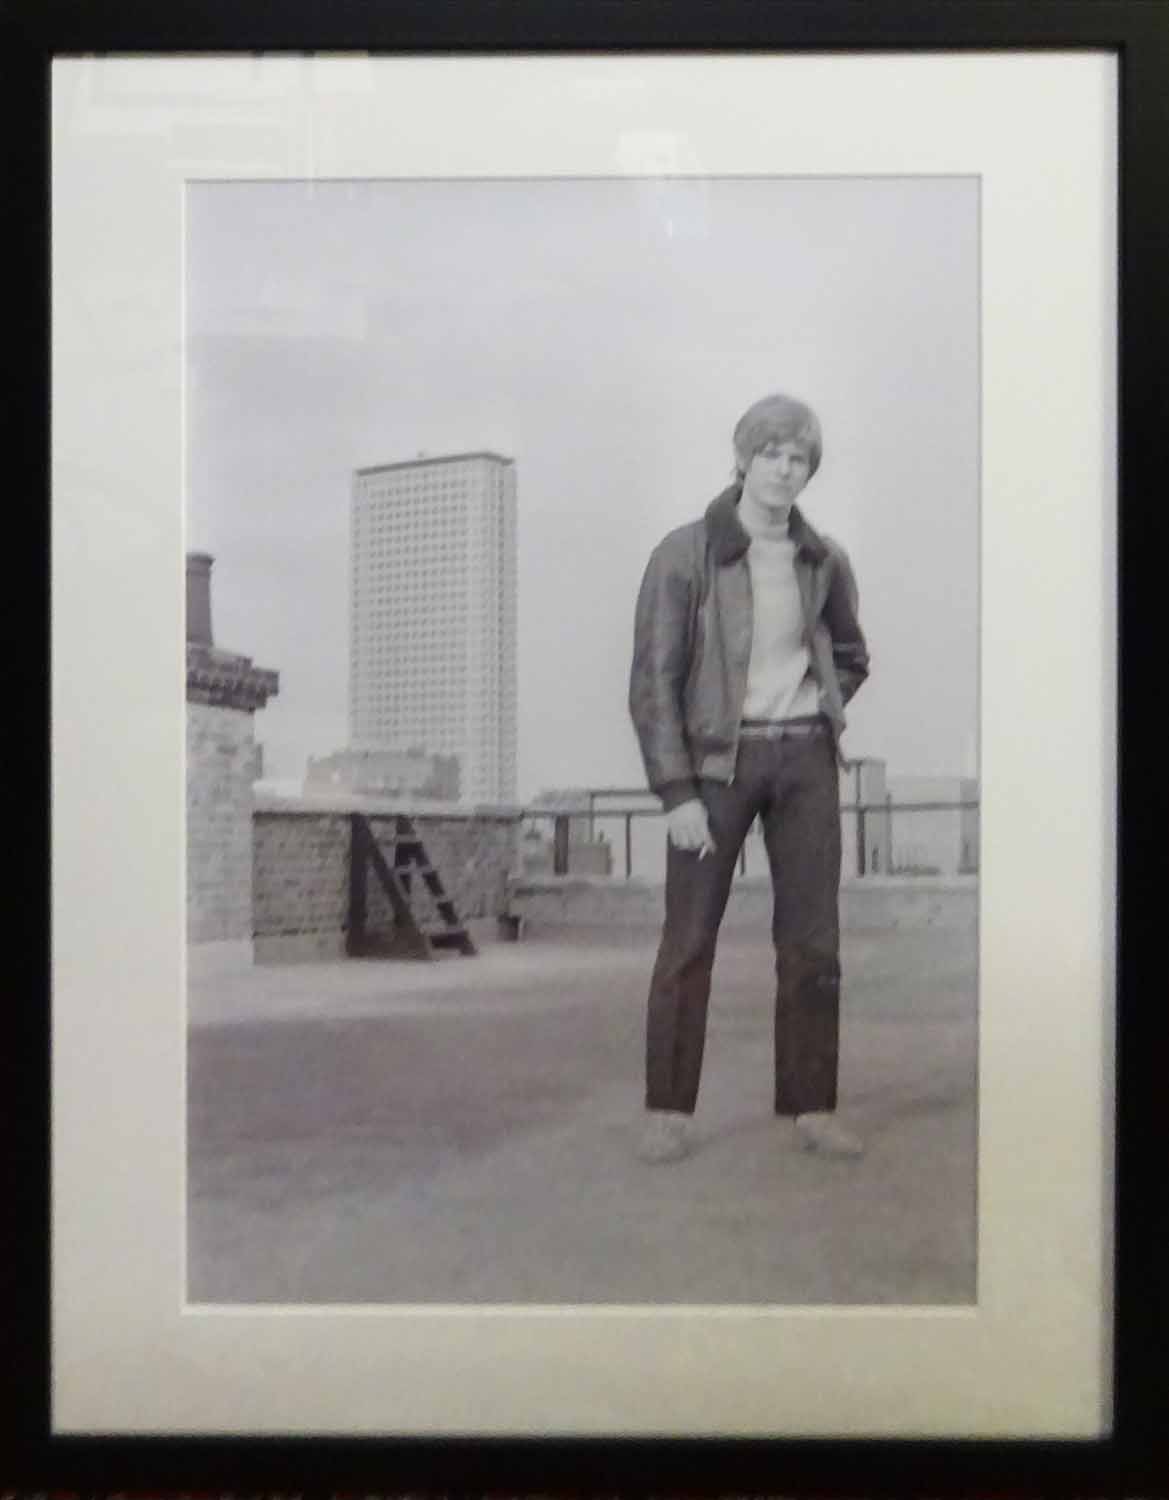 DAVID BOWIE IN 1967, from Soho House rooftop to Centrepoint, by Robin Bean, one of one, 55cm x 38cm,